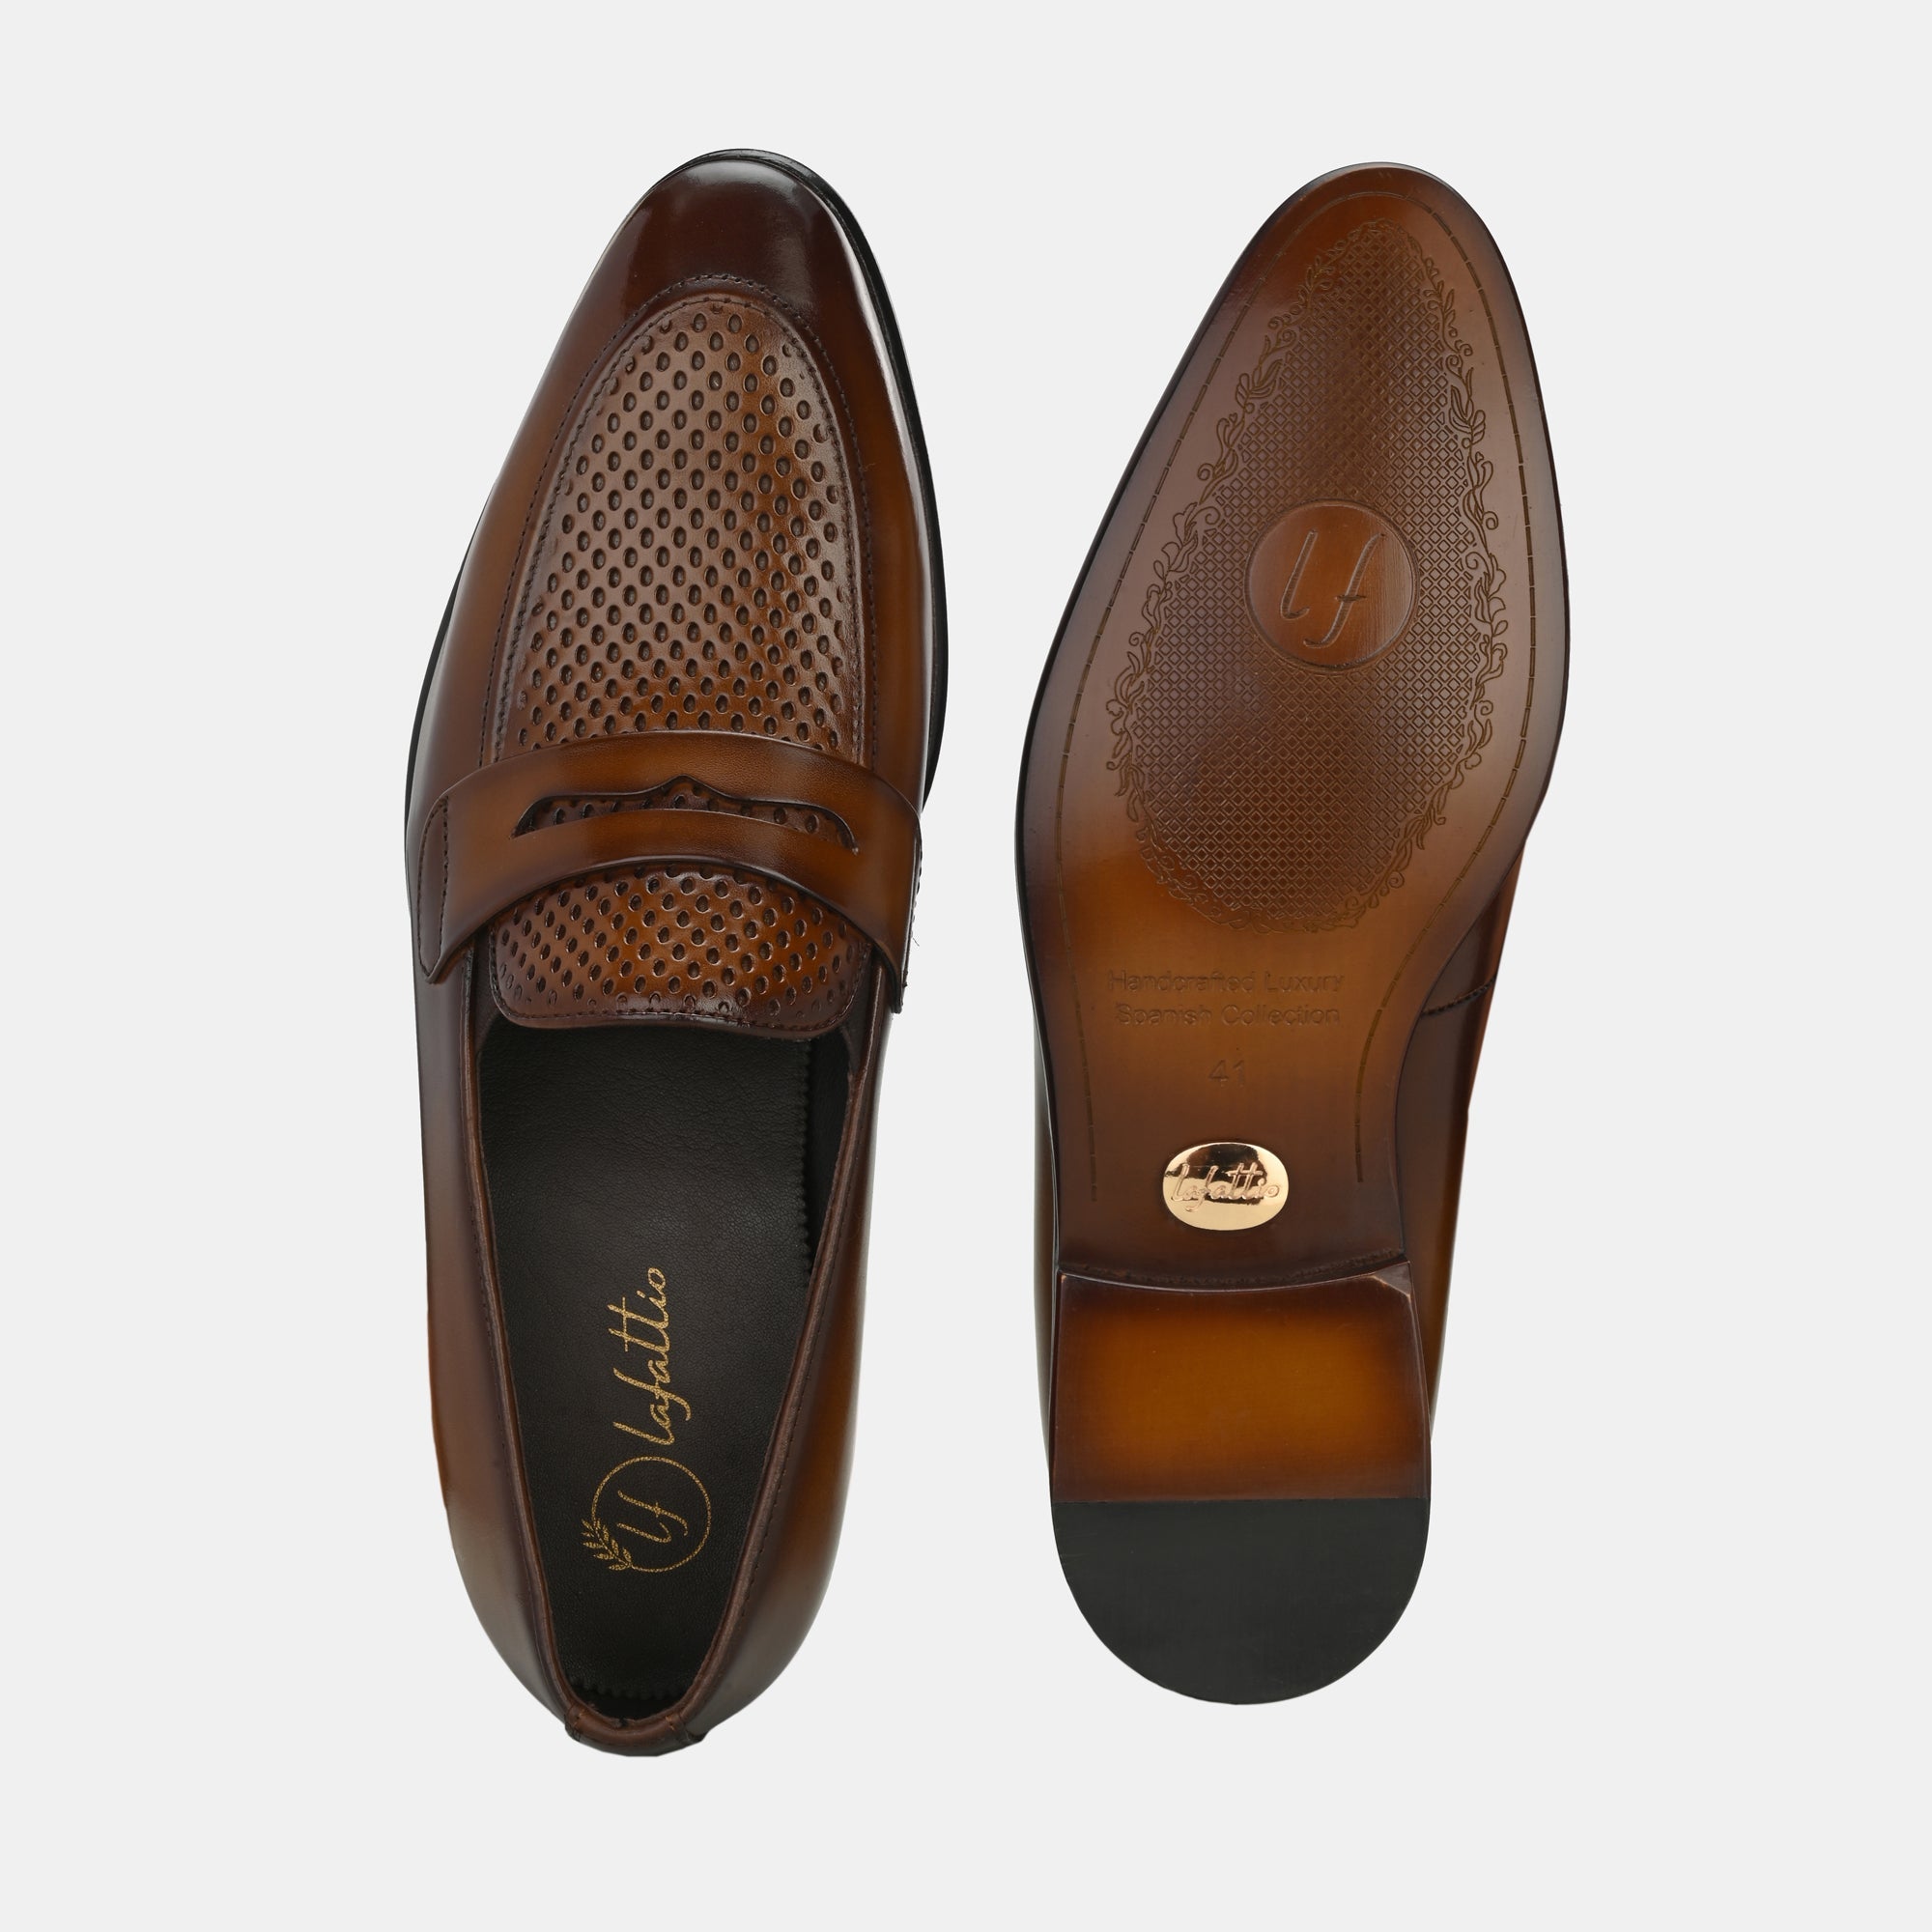 Tan Perforated Penny Loafers by Lafattio